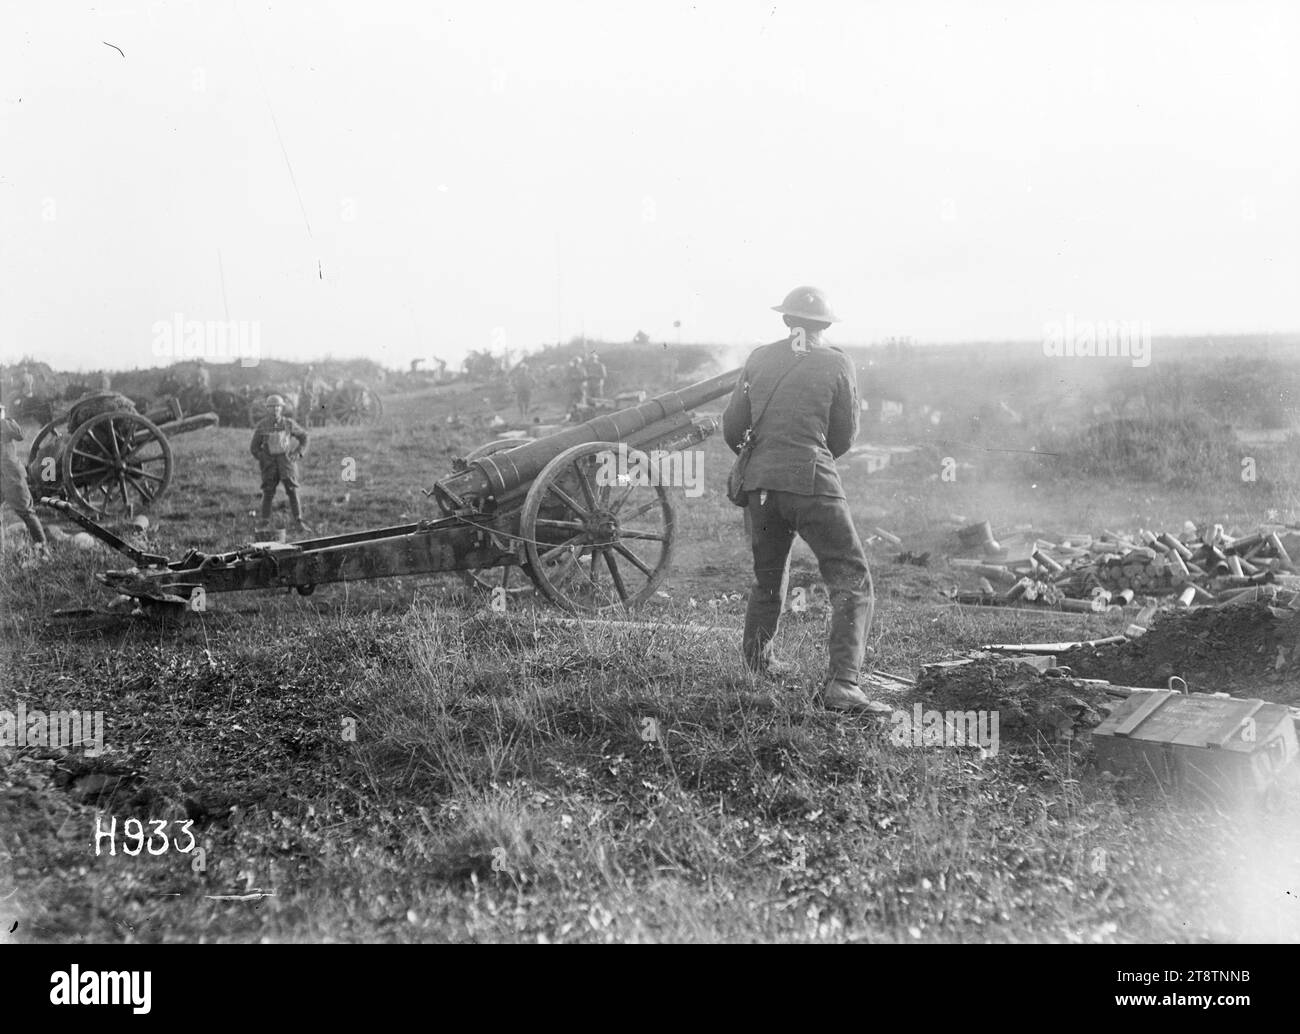 New Zealanders fire a captured German 4.2 gun, World War I, New Zealand soldiers fire a captured German 4.2 gun at German forces near Grevillers, France, during World War I. One soldier holds his hands over his ears. Other guns are visible. A pile of shell cases can be seen in the foreground. Photograph taken 24 August 1918 Stock Photo